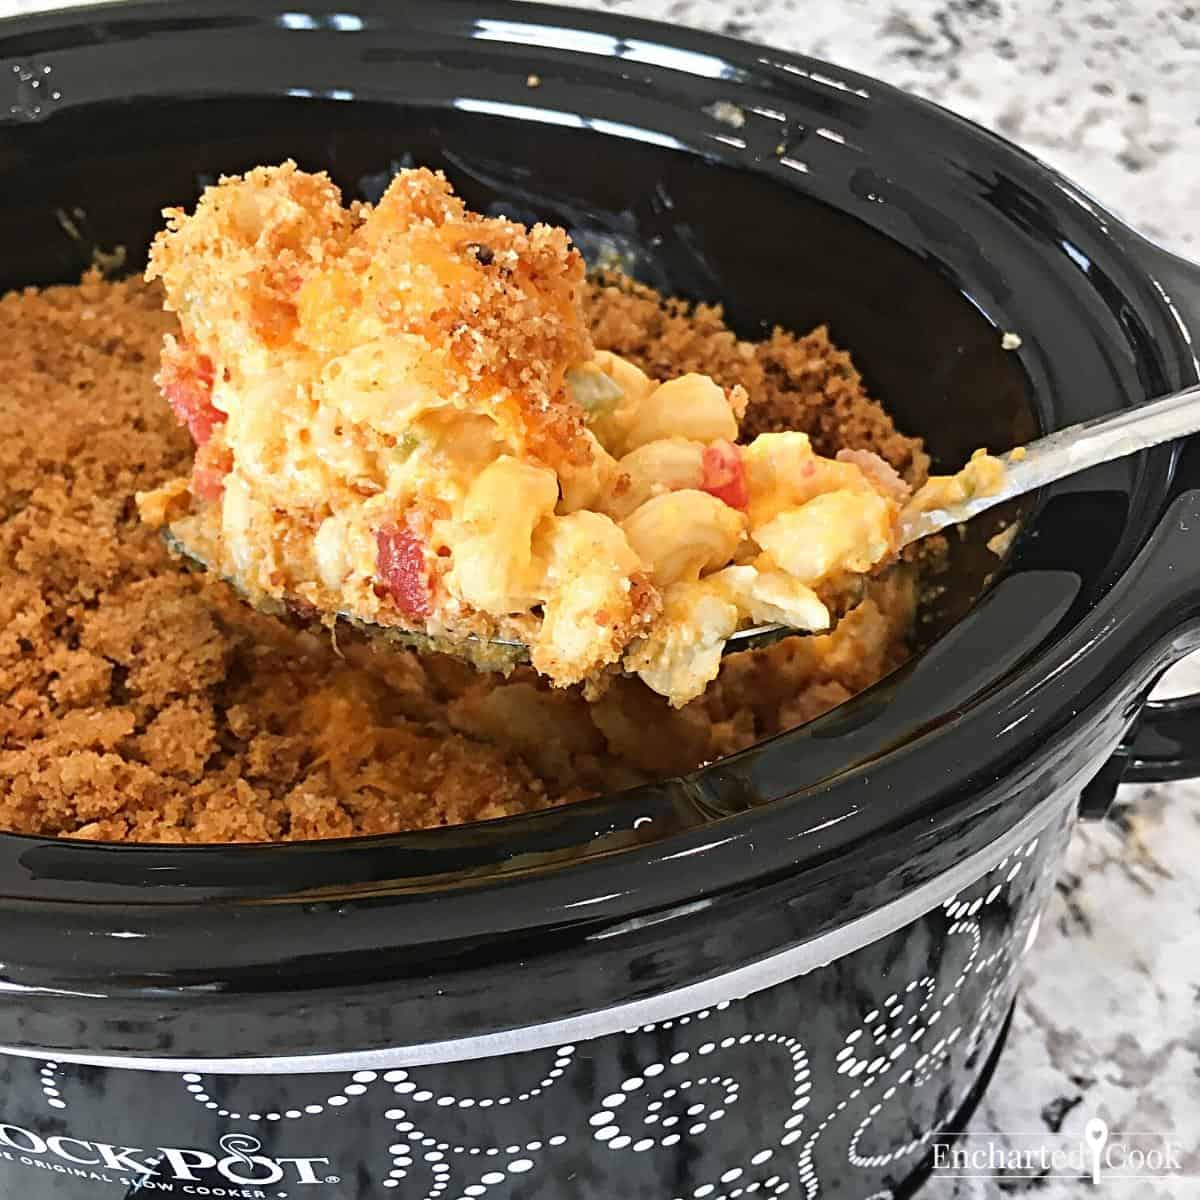 Scooping out a portion of mac and cheese from the slow cooker with a large spoon.